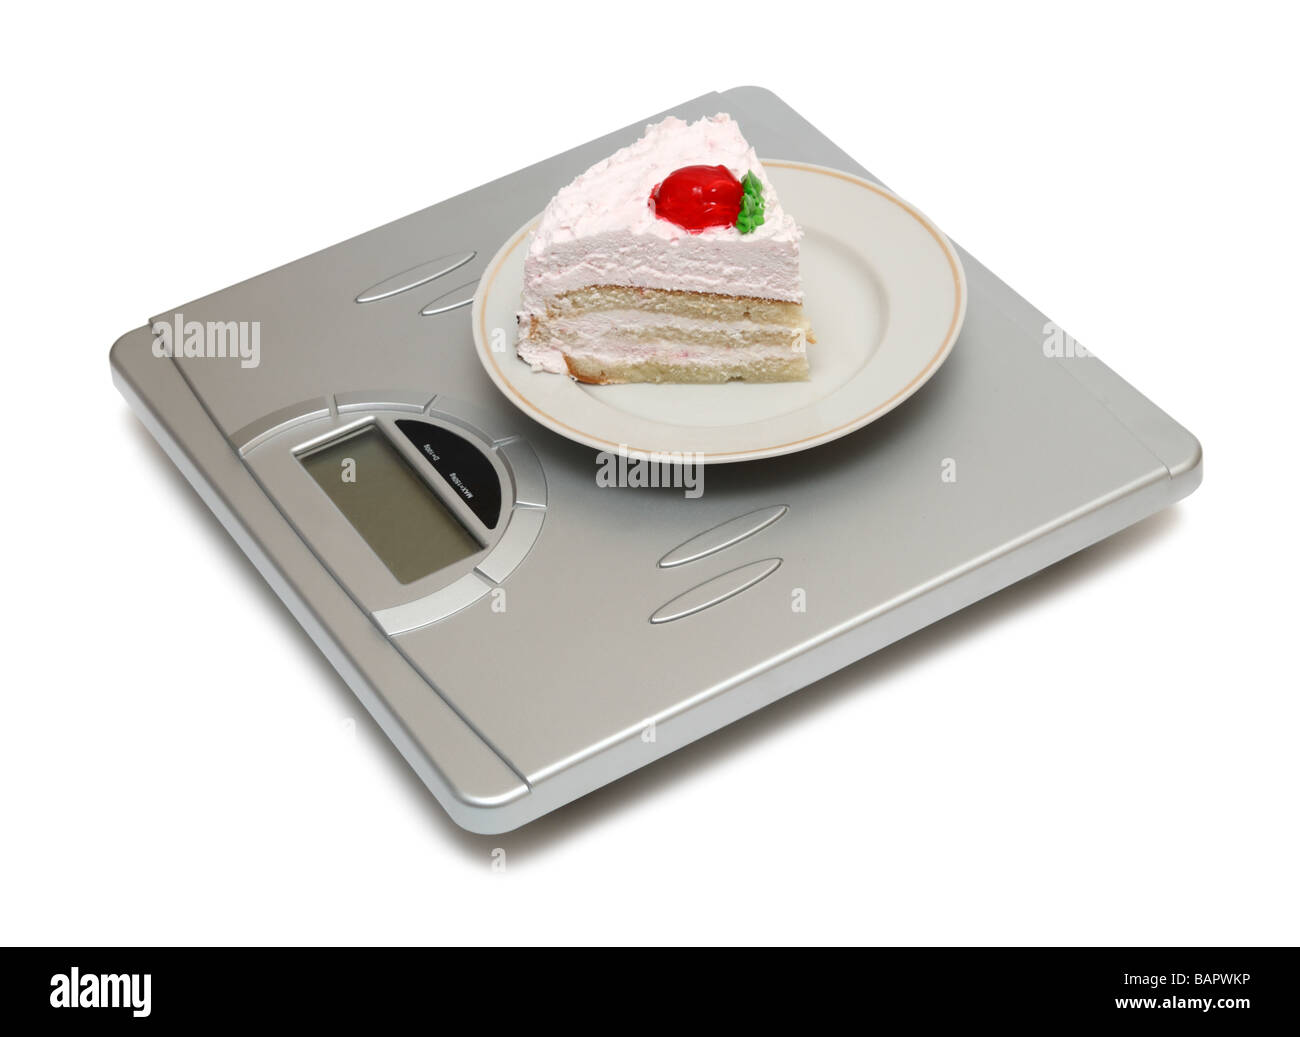 https://c8.alamy.com/comp/BAPWKP/overweight-concept-cake-on-scales-BAPWKP.jpg